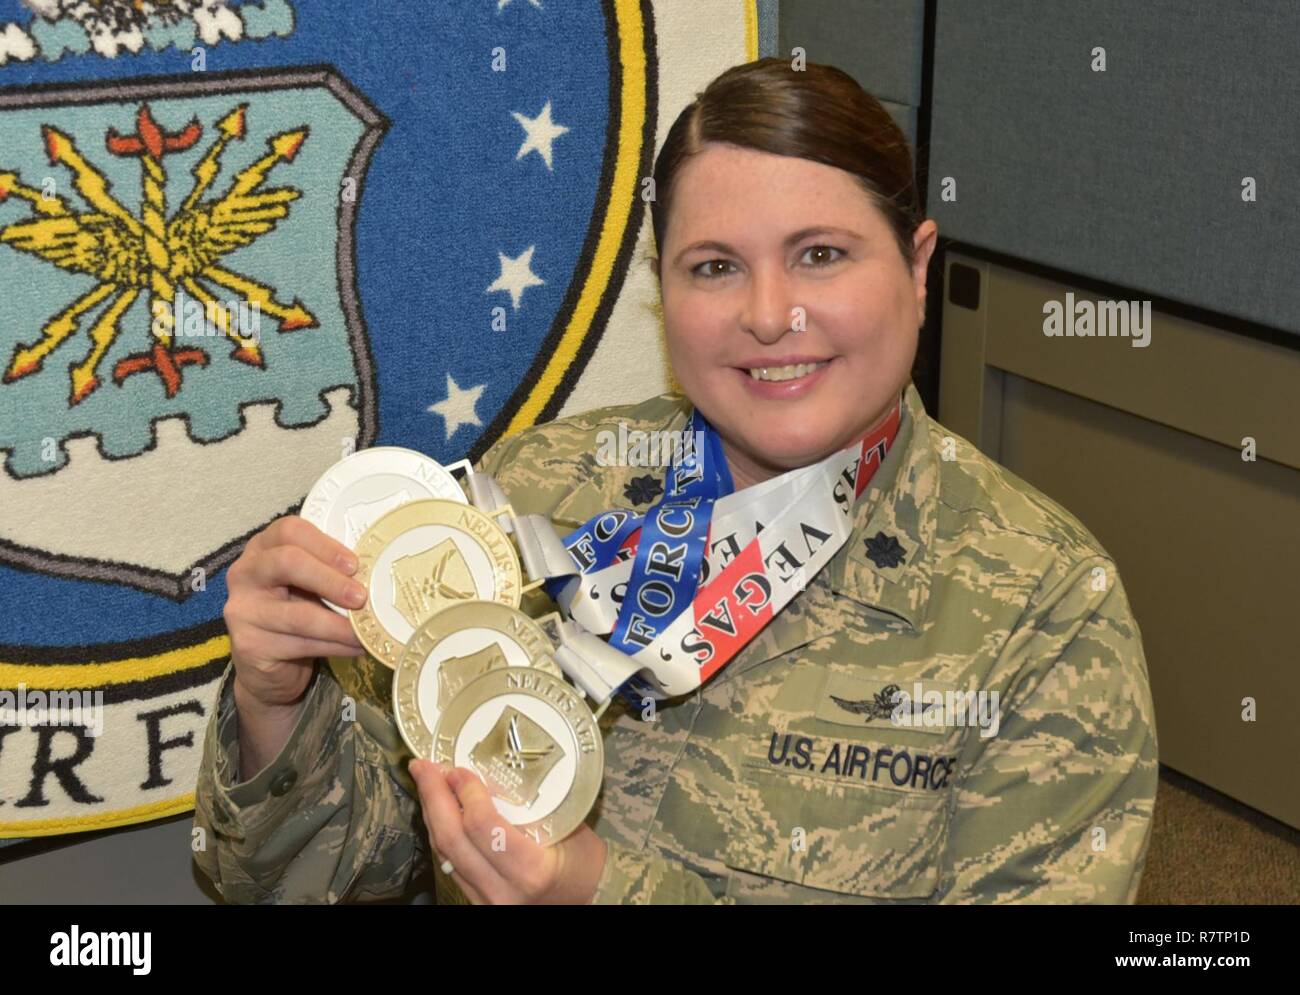 Lt. Col. Jackie Burns, 552nd Air Control Group, 552nd Air Control Wing, displays the medals she earned at the Wounded Warrior Trials at Nellis Air Force Base, Nev., Feb. 17. Burns earned Silver Medals in 5K cycling, 100-meter free style, discus and a Bronze Medal in the 50-meter backstroke. Burns was selected as a primary Wounded Warrior team member and will compete in the Warrior Games June 30-July 8 in Chicago.  (Air Force Stock Photo